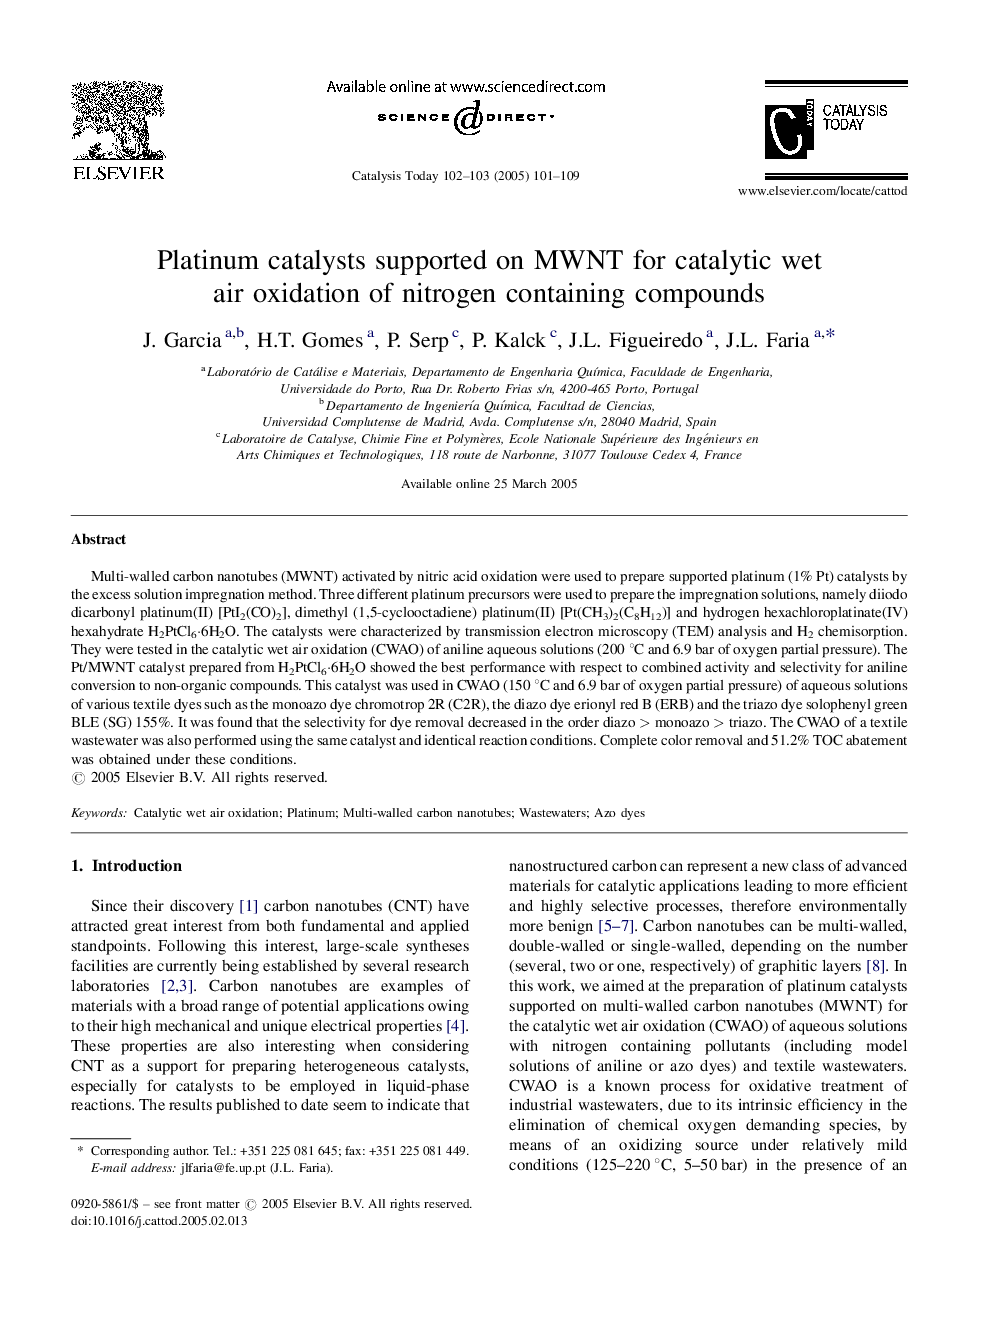 Platinum catalysts supported on MWNT for catalytic wet air oxidation of nitrogen containing compounds